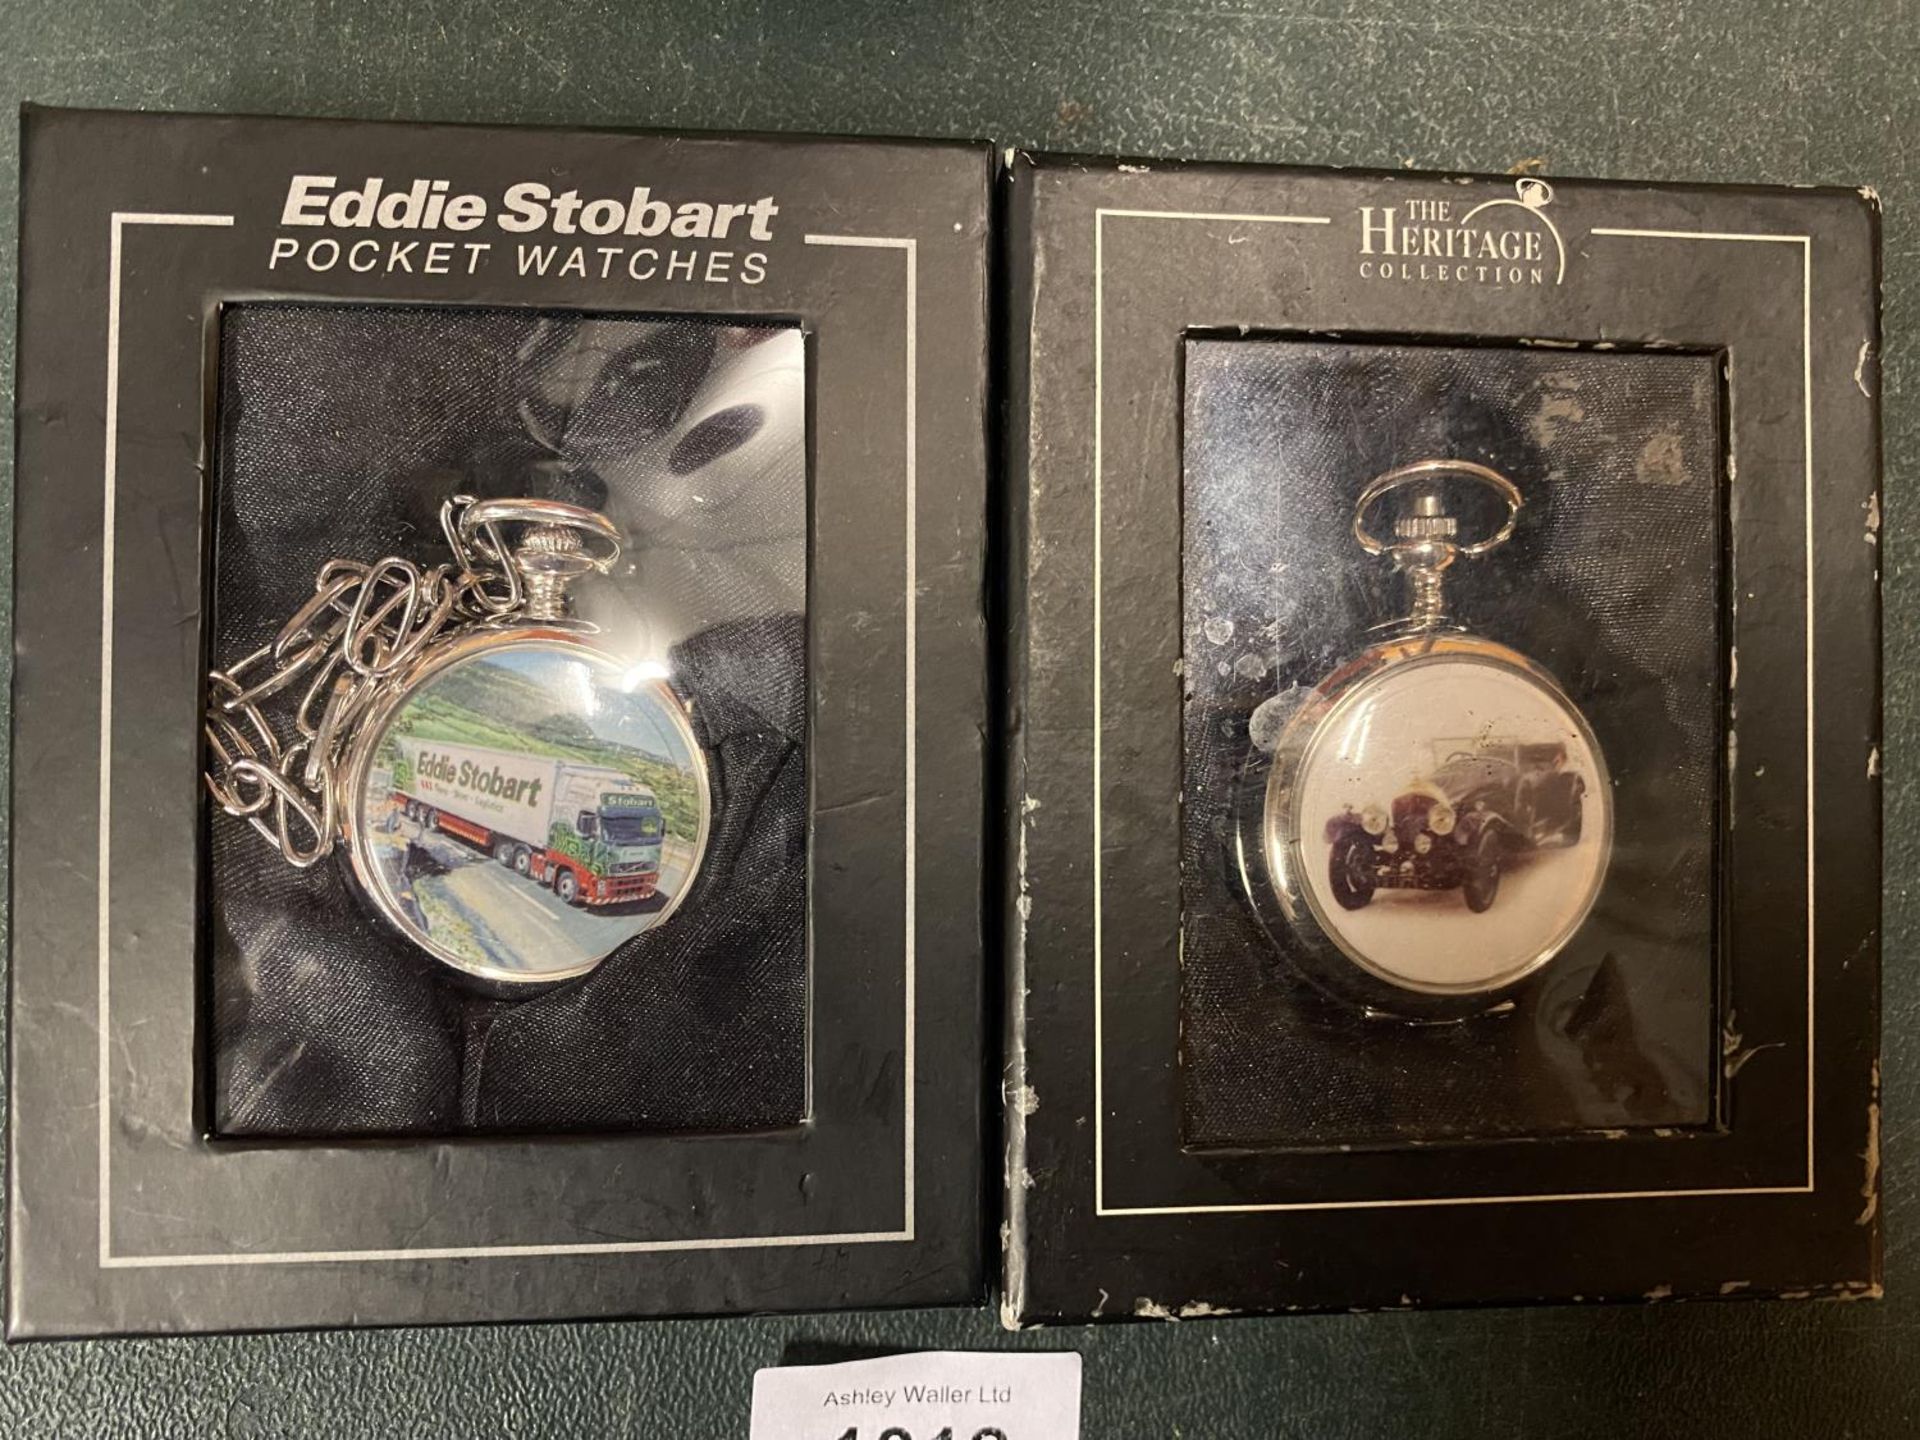 TWO BOXED POCKET WATCHES, ONE WITH AN EDDIE STOBART LORRY AND ONE WITH A CLASSIC CAR